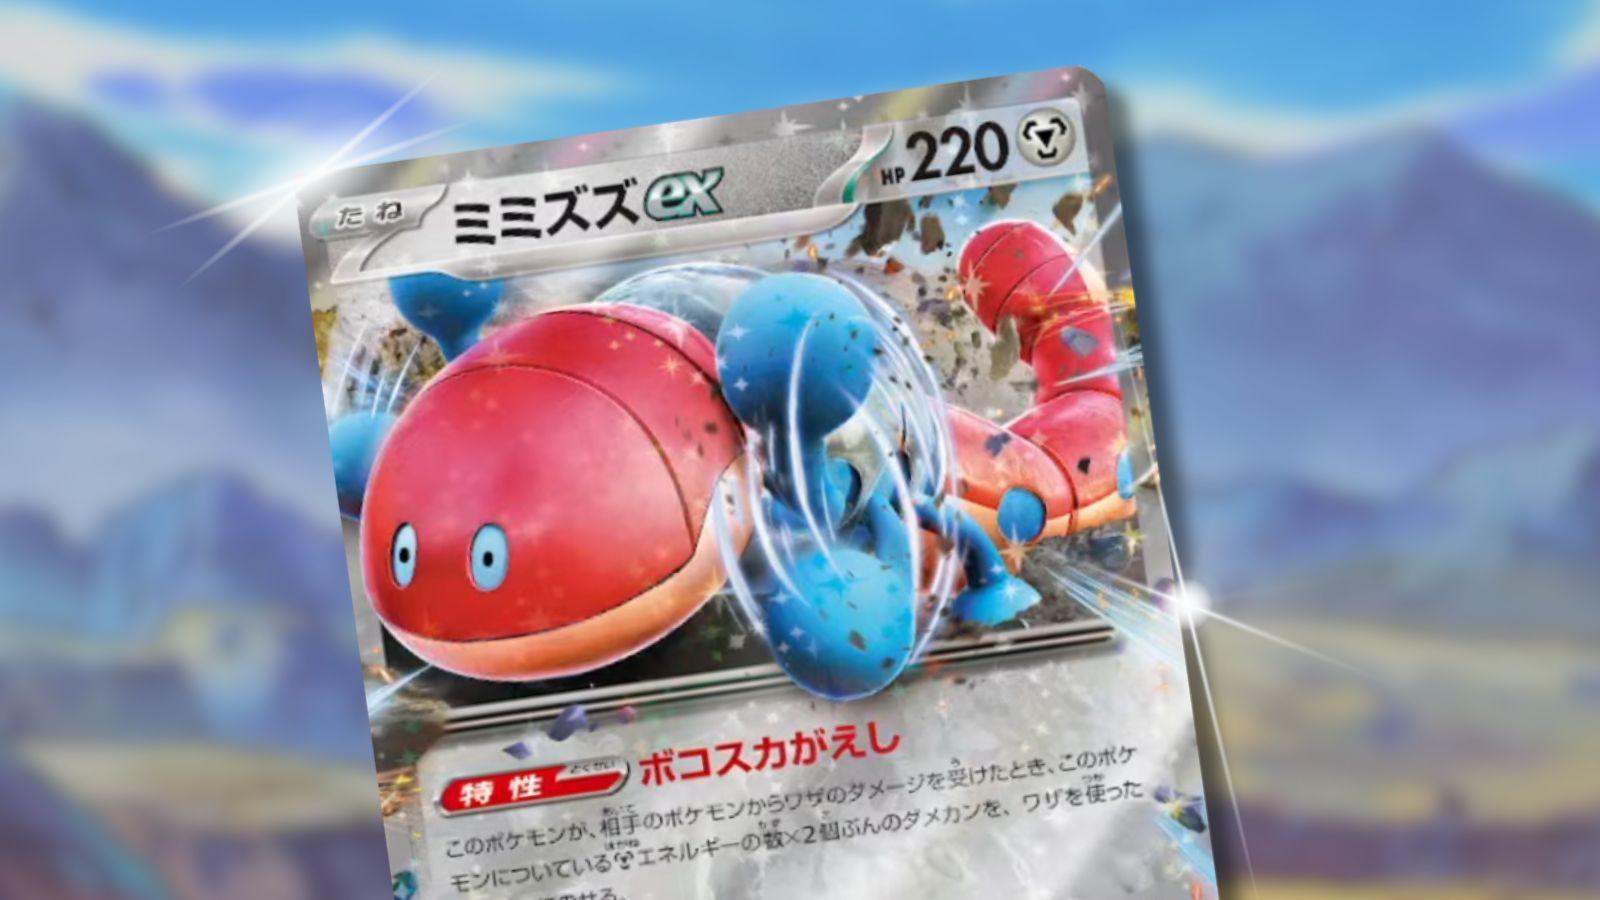 Orthworm ex Stellar Miracle Pokemon card with anime background.